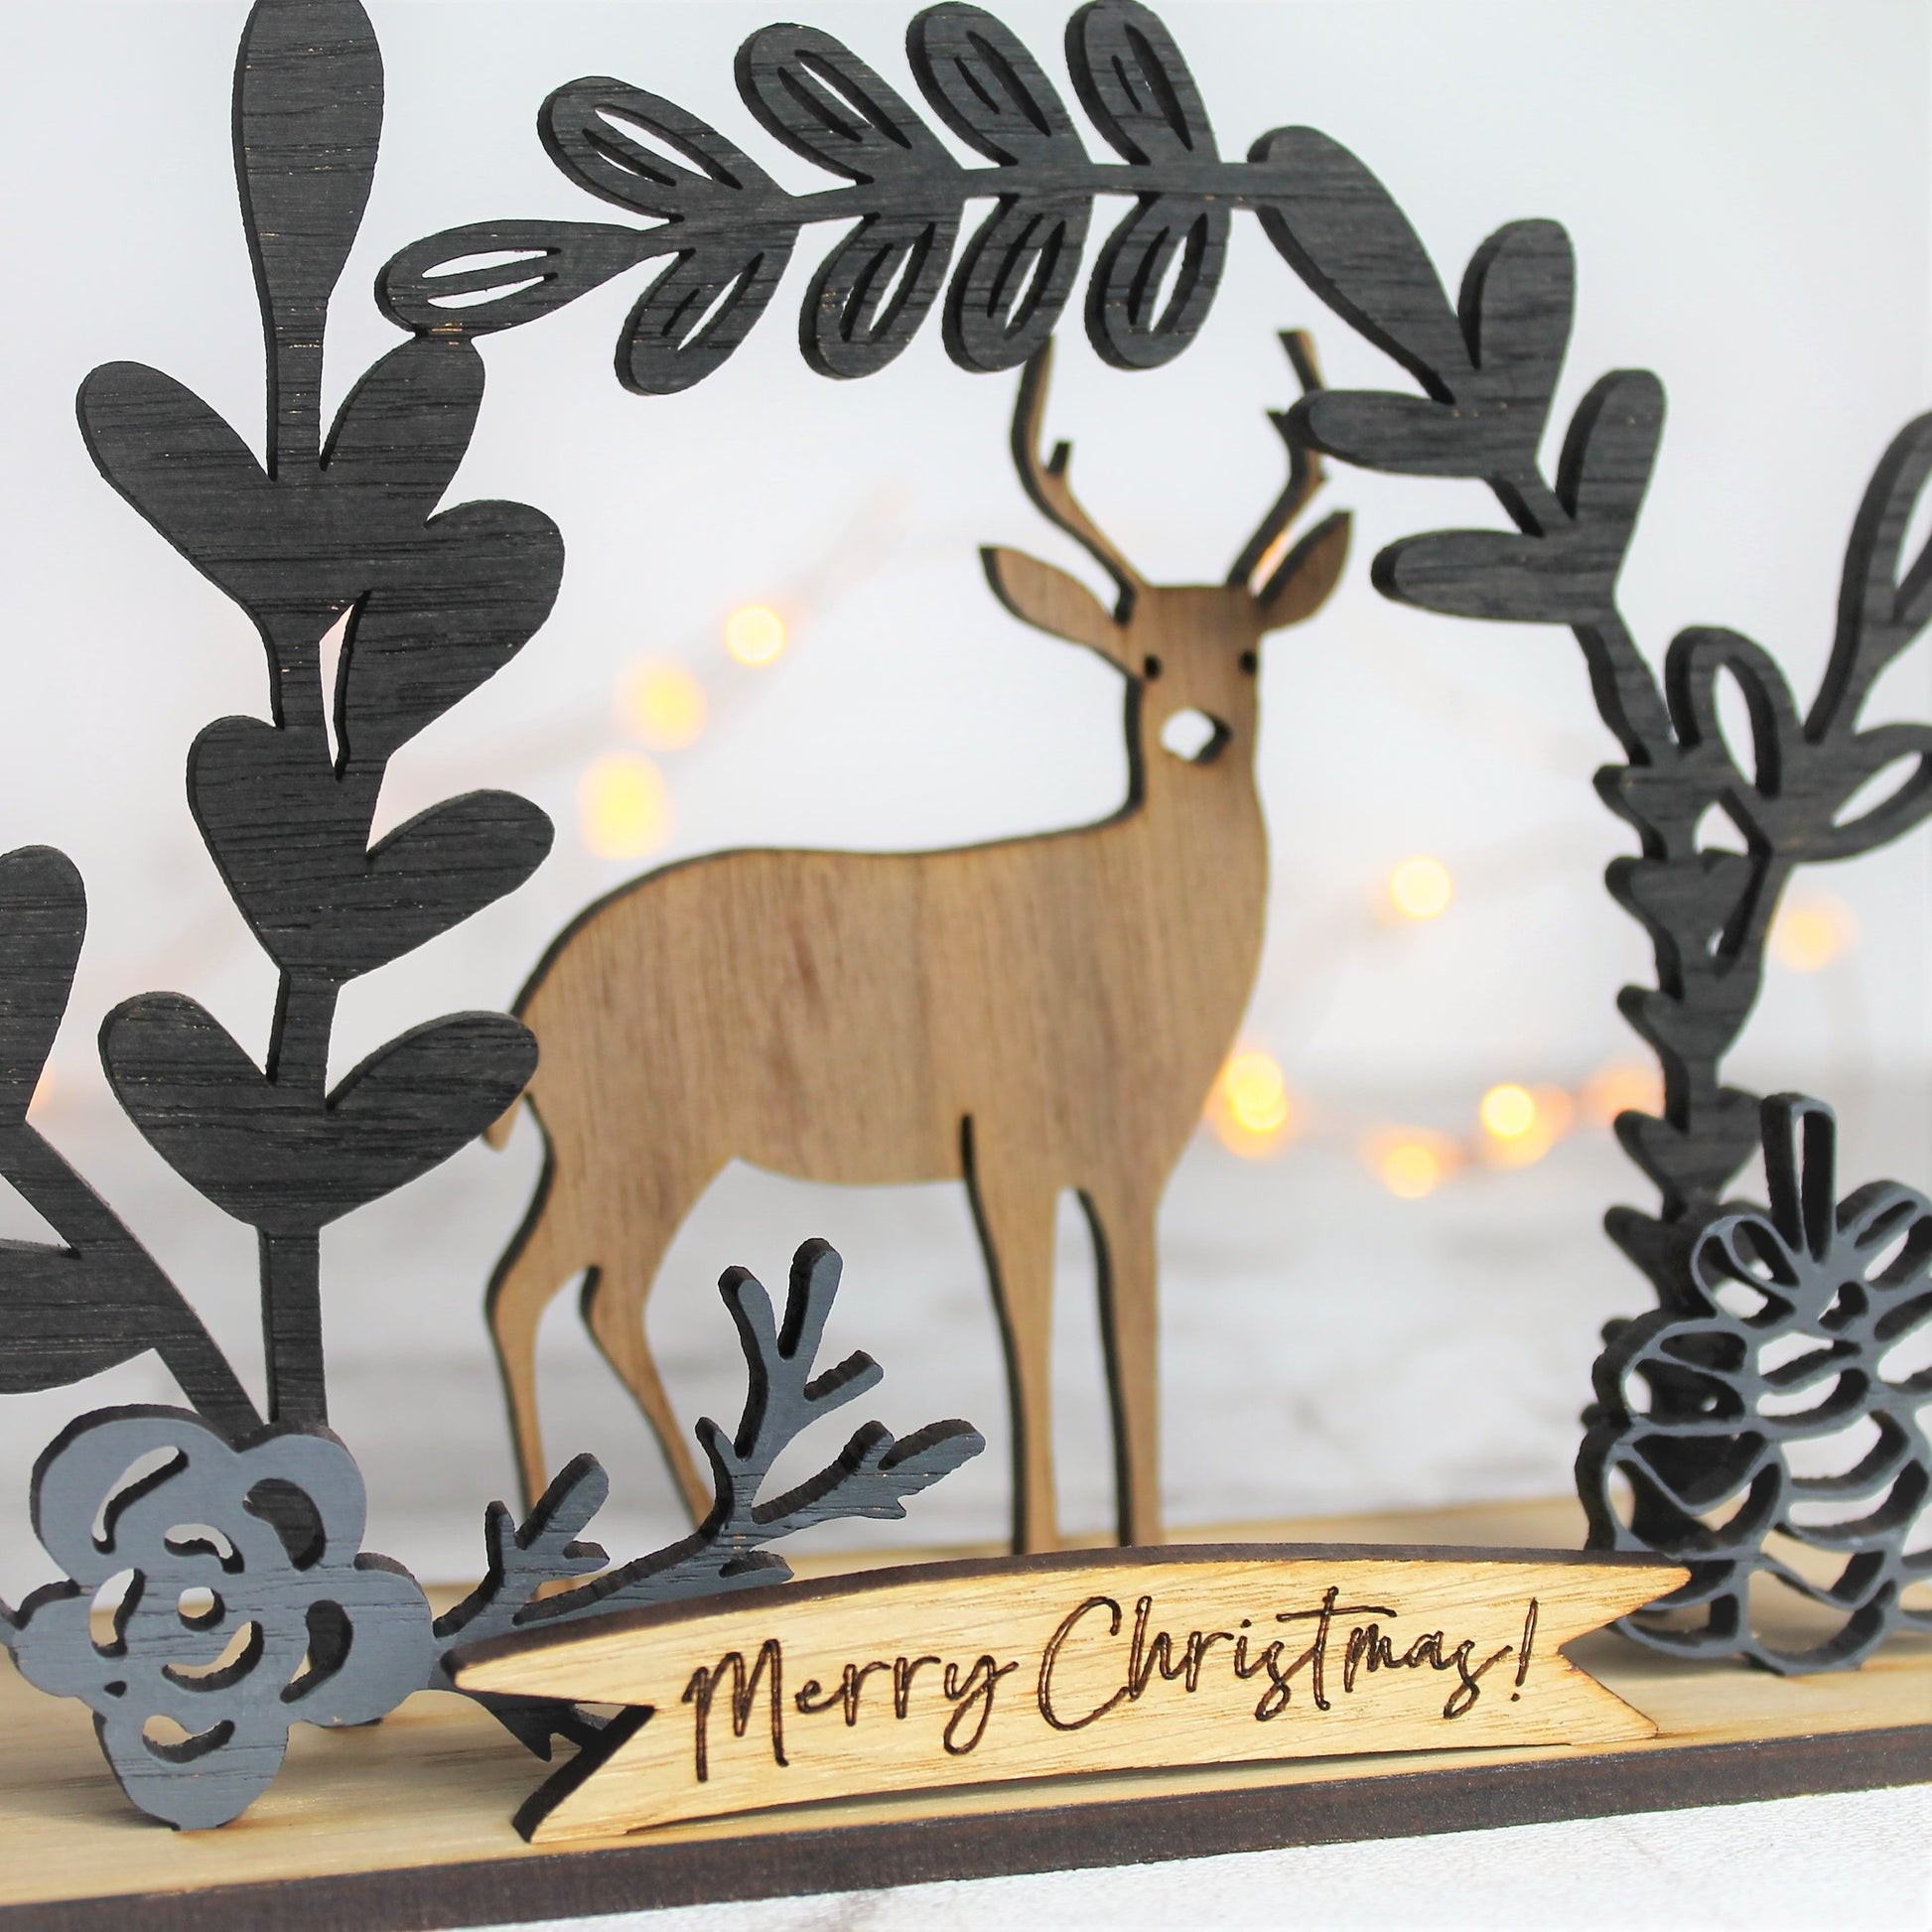 Merry christmas sign behing a winter scene with a deer and black floral flourishes 